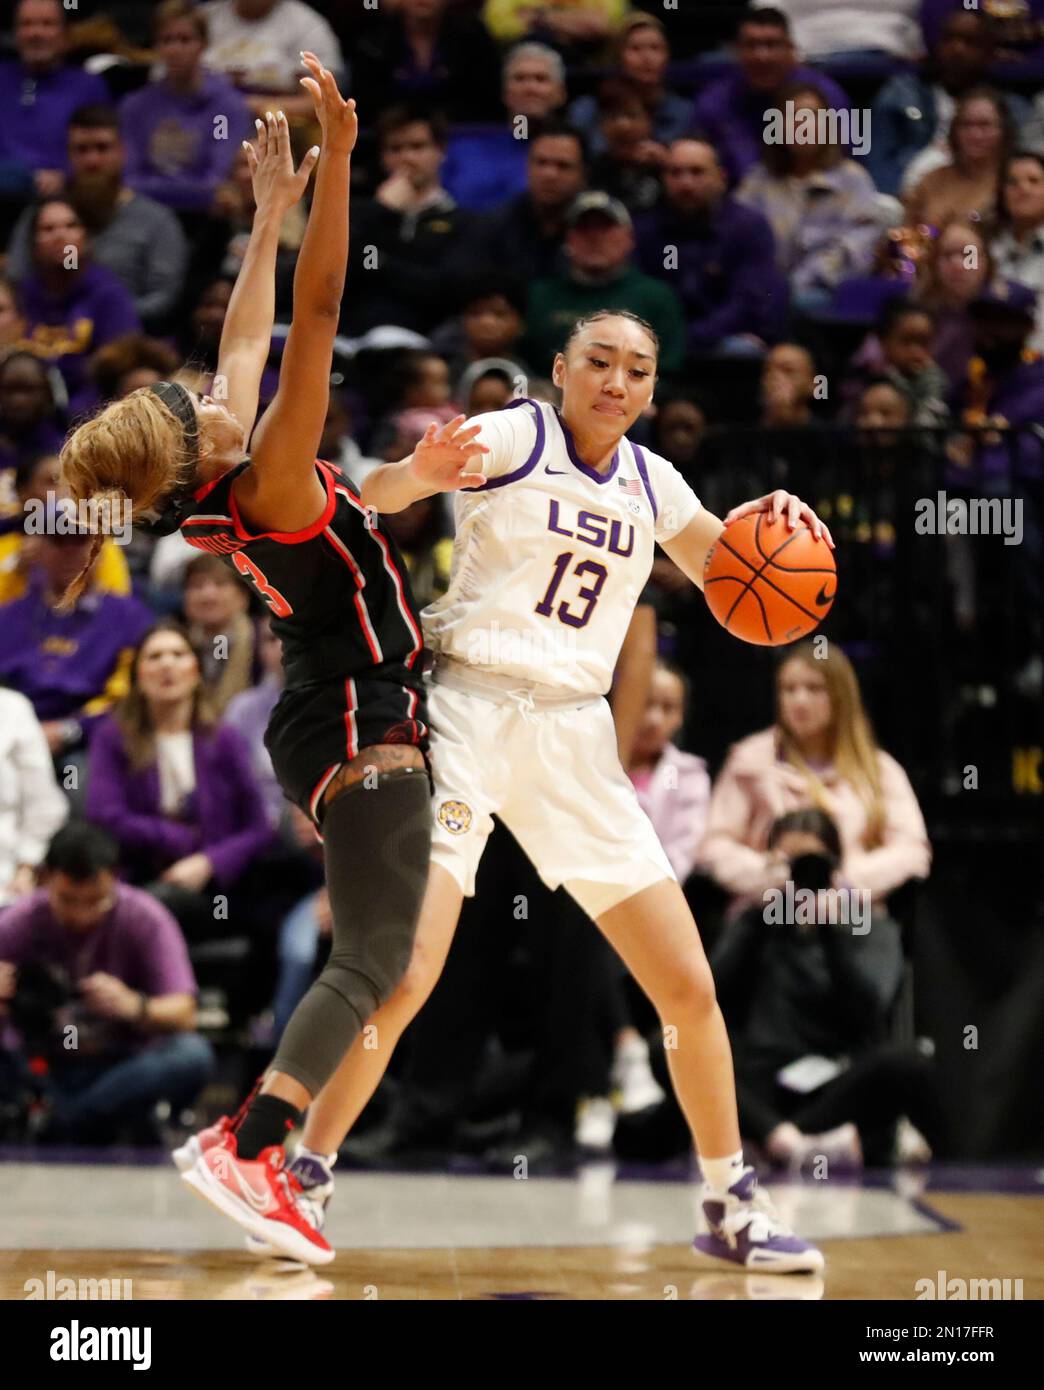 Baton Rouge, USA. 02nd Feb, 2023. LSU Lady Tigers guard Last-Tear Poa (13) tries to get some space between her a Georgia Lady Bulldogs guard Diamond Battles (3) during a women's college basketball game at the Pete Maravich Assembly Center in Baton Rouge, Louisiana on Thursday, February 2, 2023. (Photo by Peter G. Forest/Sipa USA) Credit: Sipa USA/Alamy Live News Stock Photo